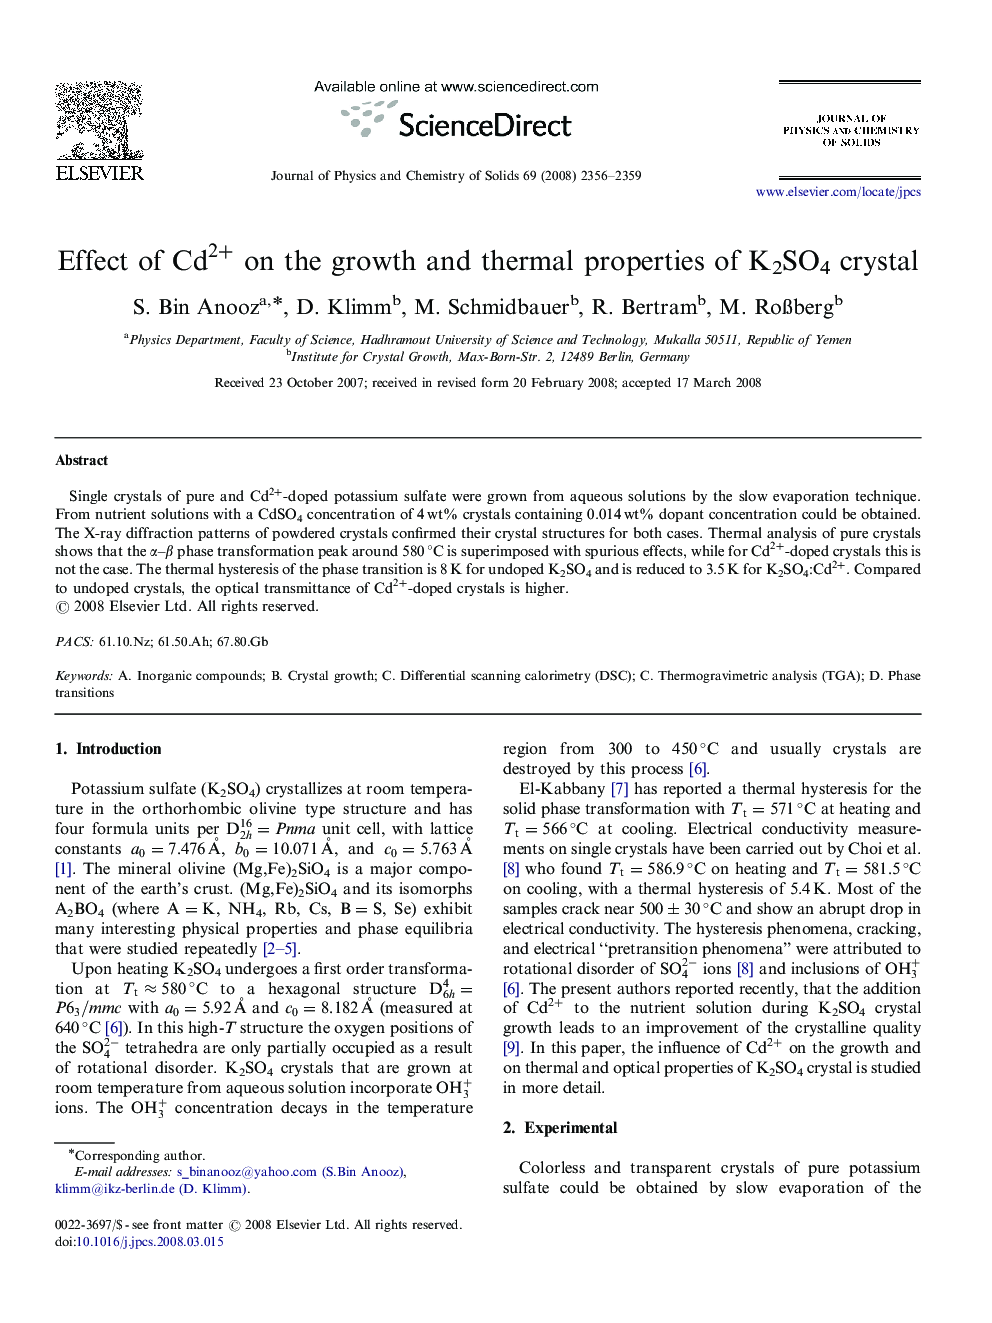 Effect of Cd2+Cd2+ on the growth and thermal properties of K2SO4 crystal